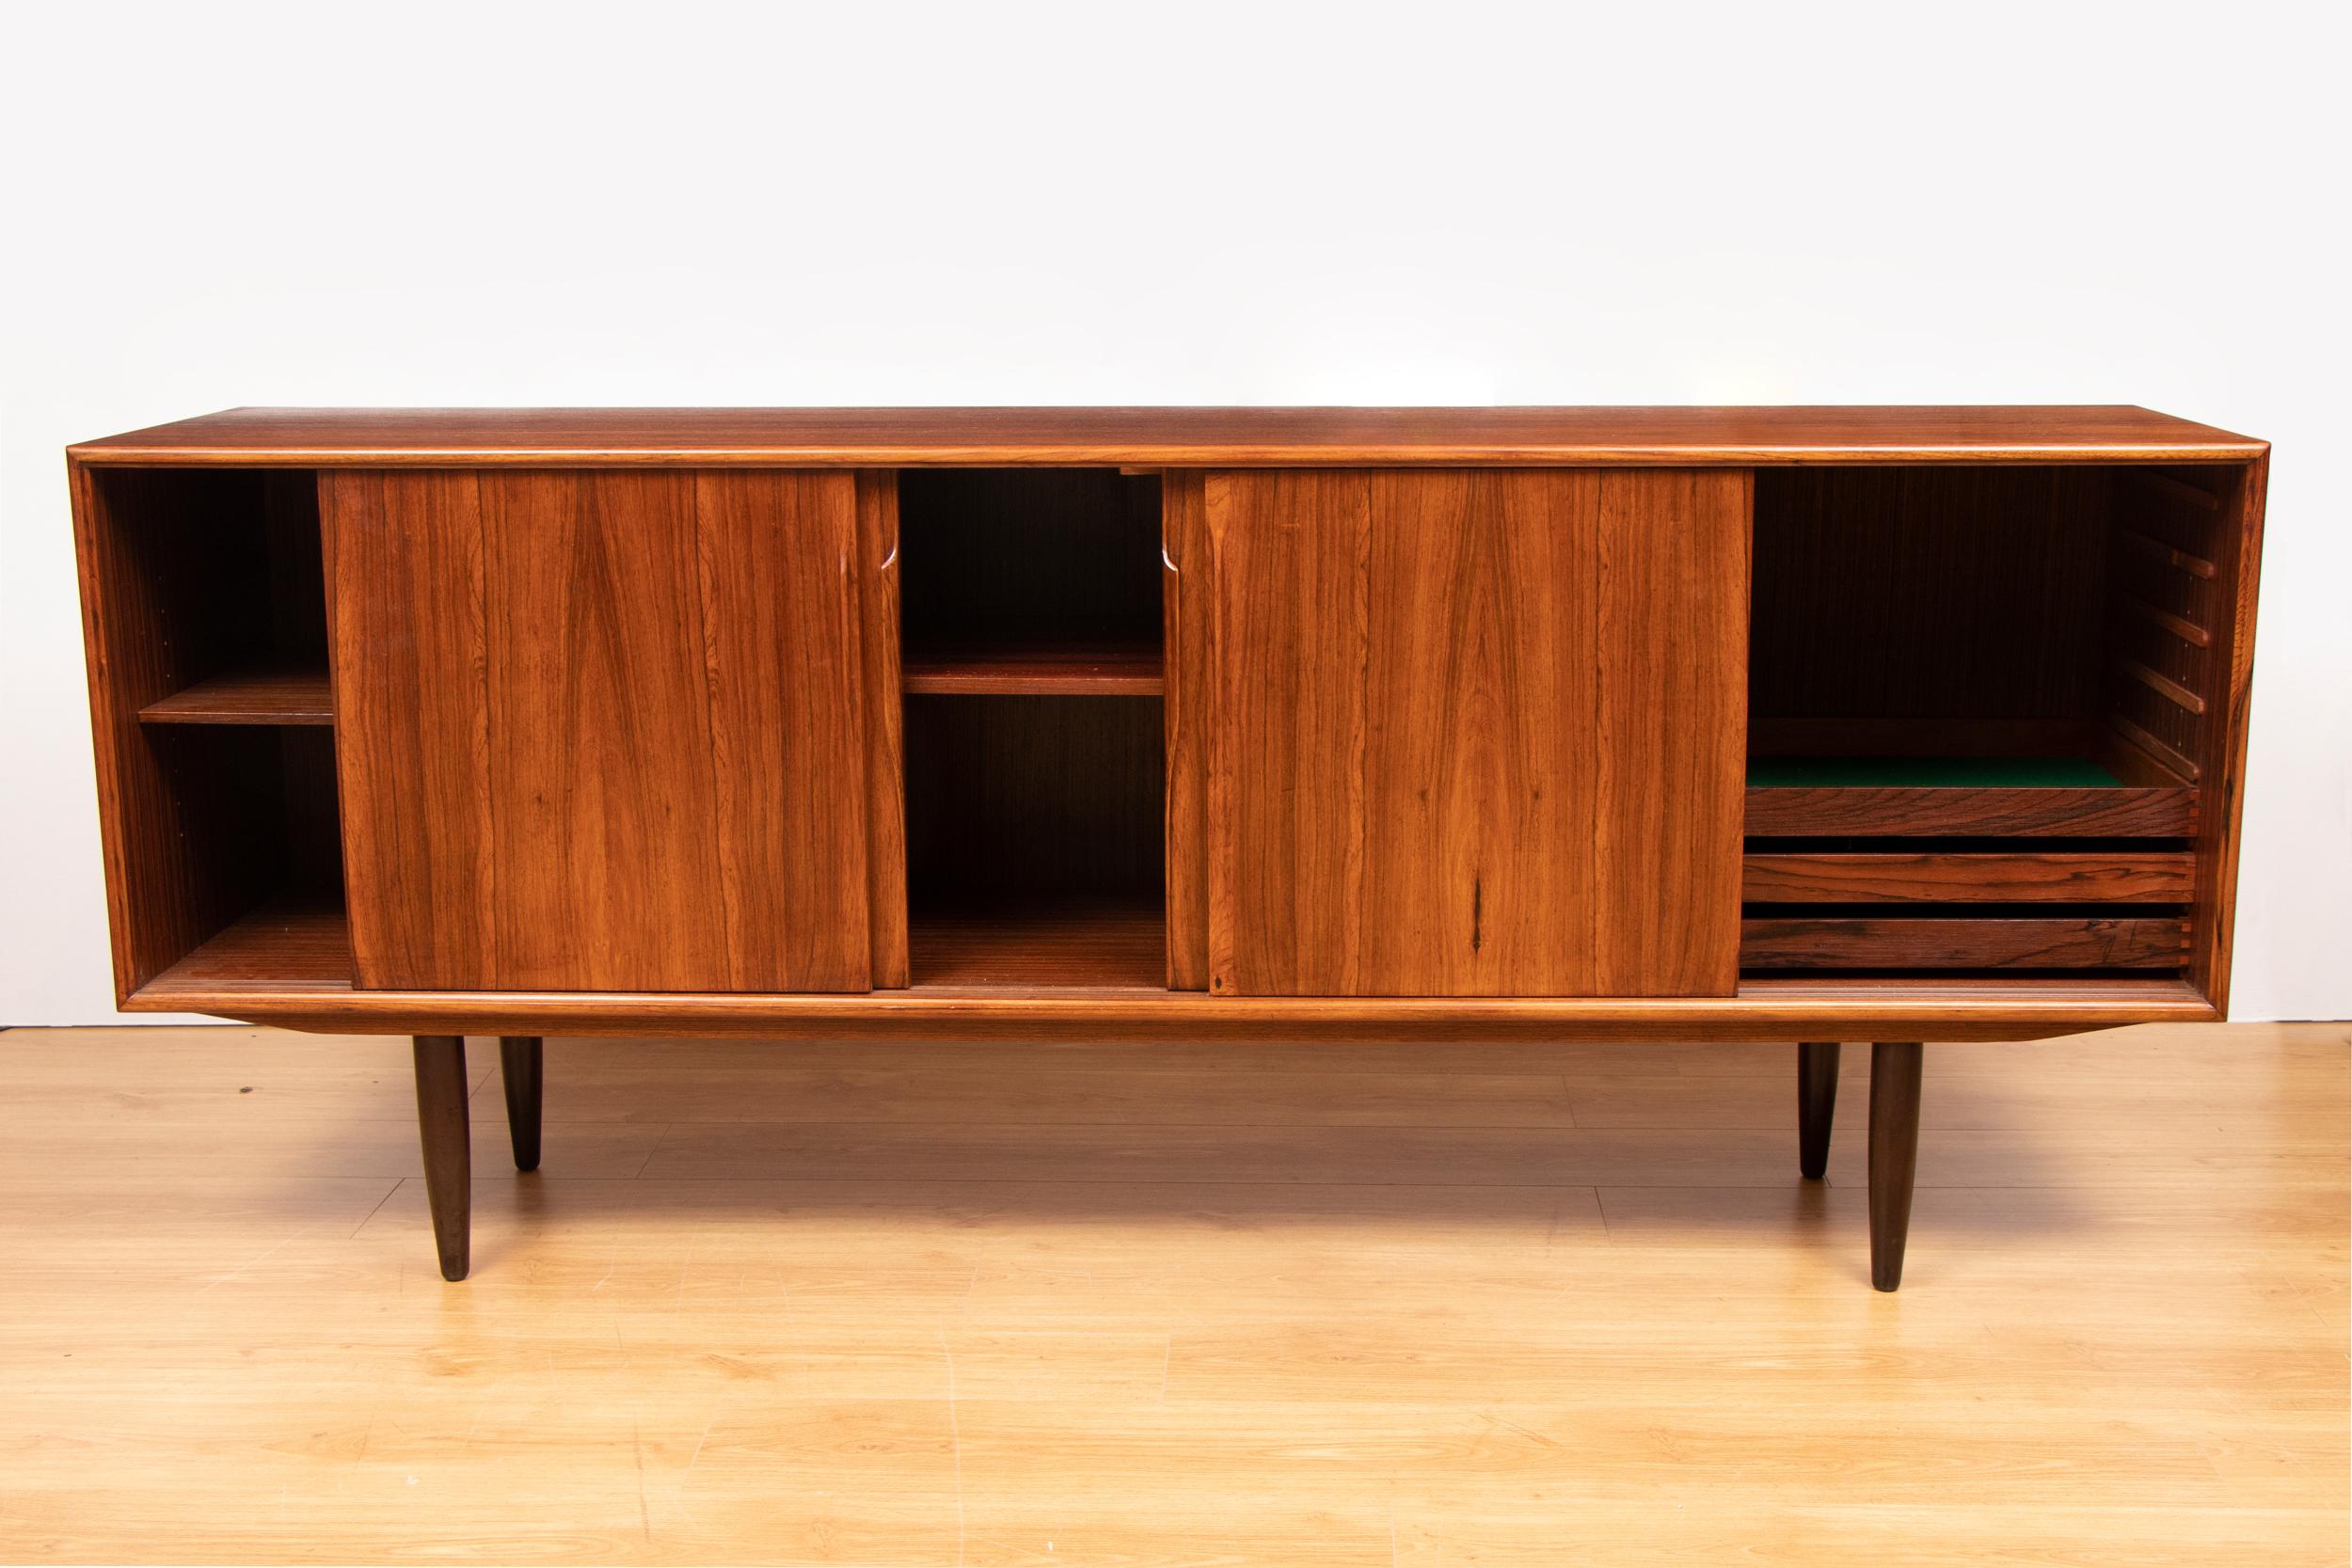 Danish rosewood sideboard with four sliding doors each having sculptural handles. Interior fitted with shelves and drawers.